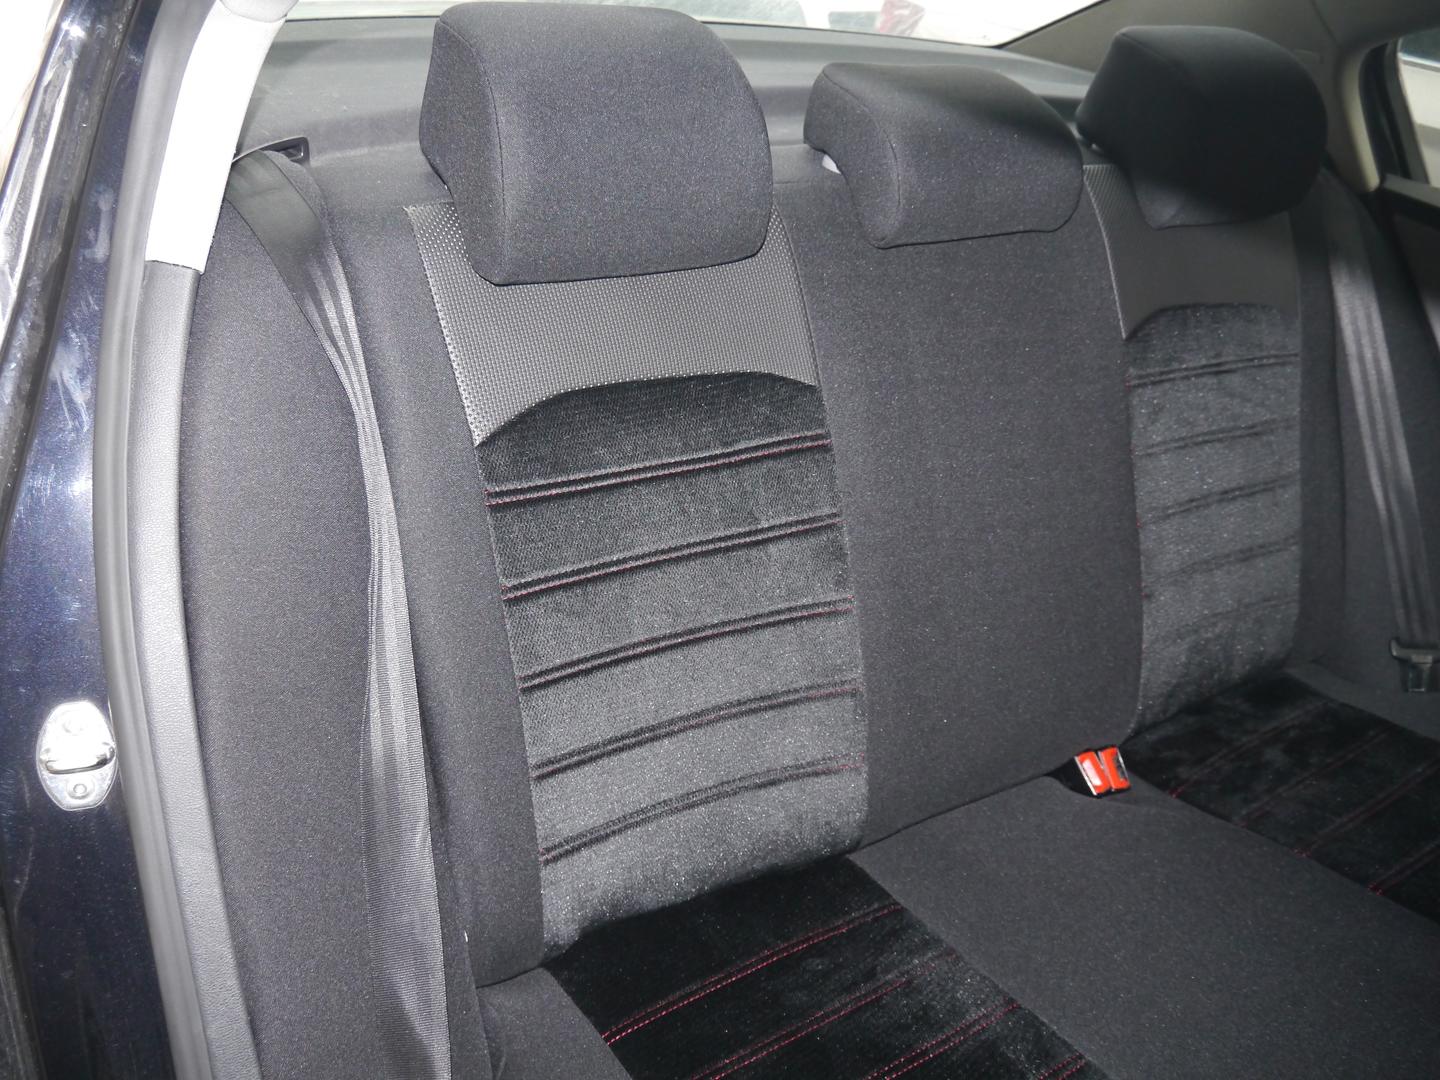 Car Seat Covers Protectors For Vw Golf Mk7 Estate No4a - Genuine Vw Golf Mk7 Rear Seat Covers